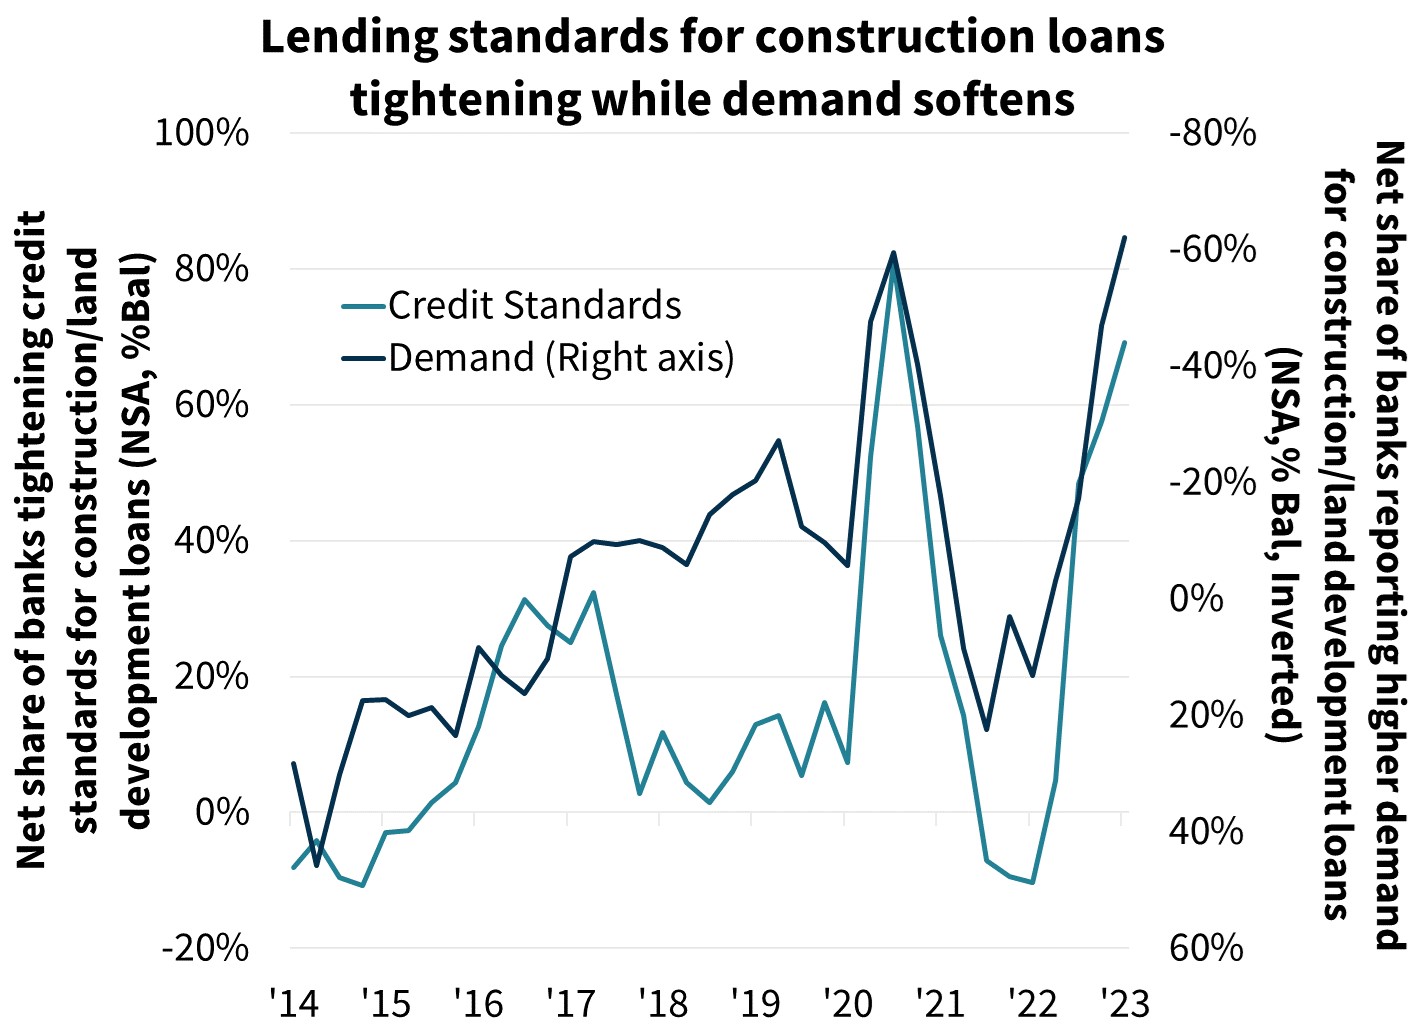  Lending standards for construction loans tightening while demand softens
